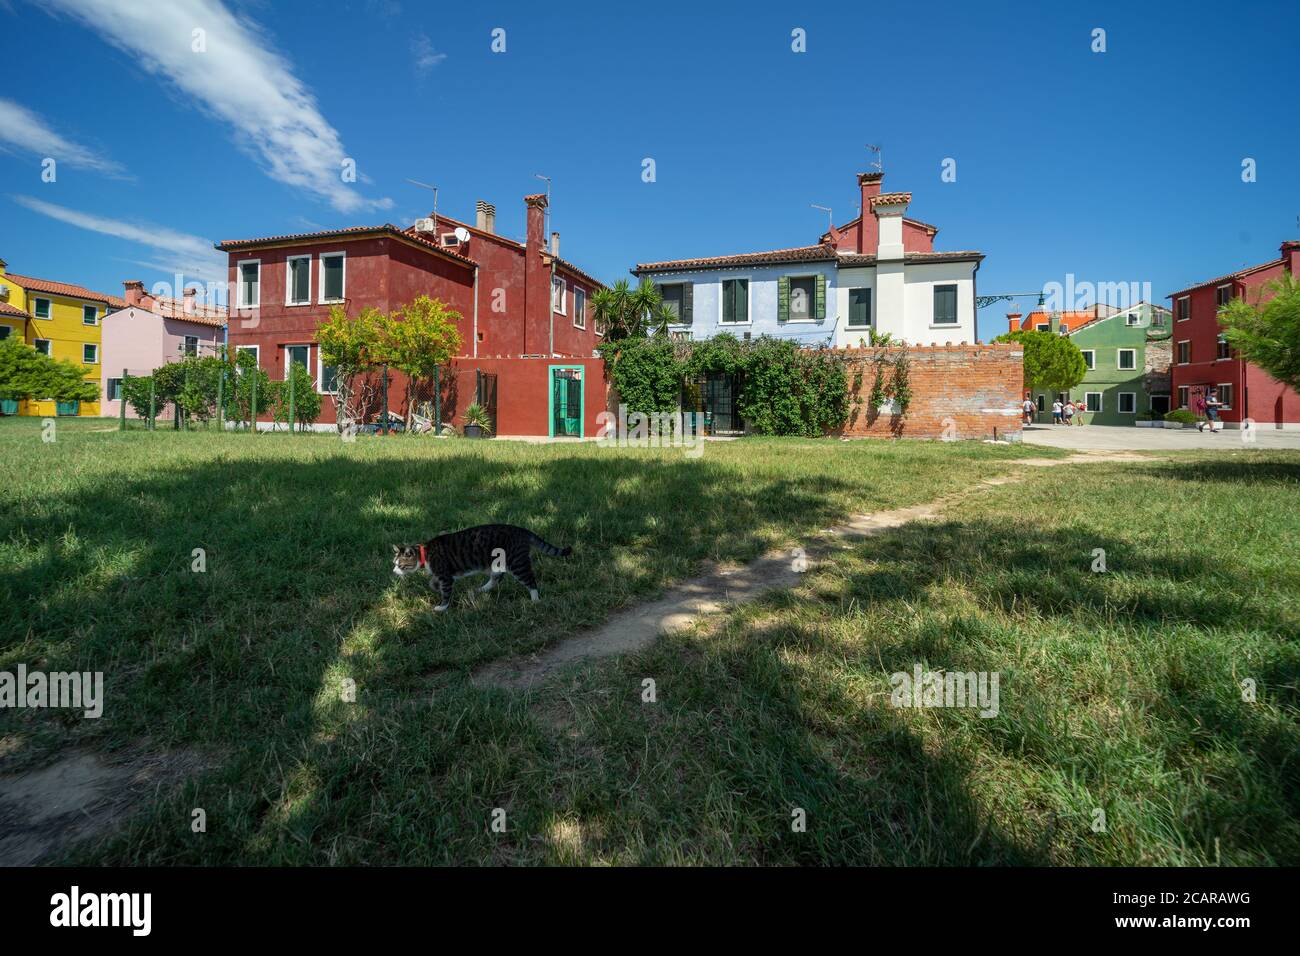 Burano island, Venetian Lagoon, Venice, Italy, panorama with the typical coloured village homes and a cat on the lawn Stock Photo